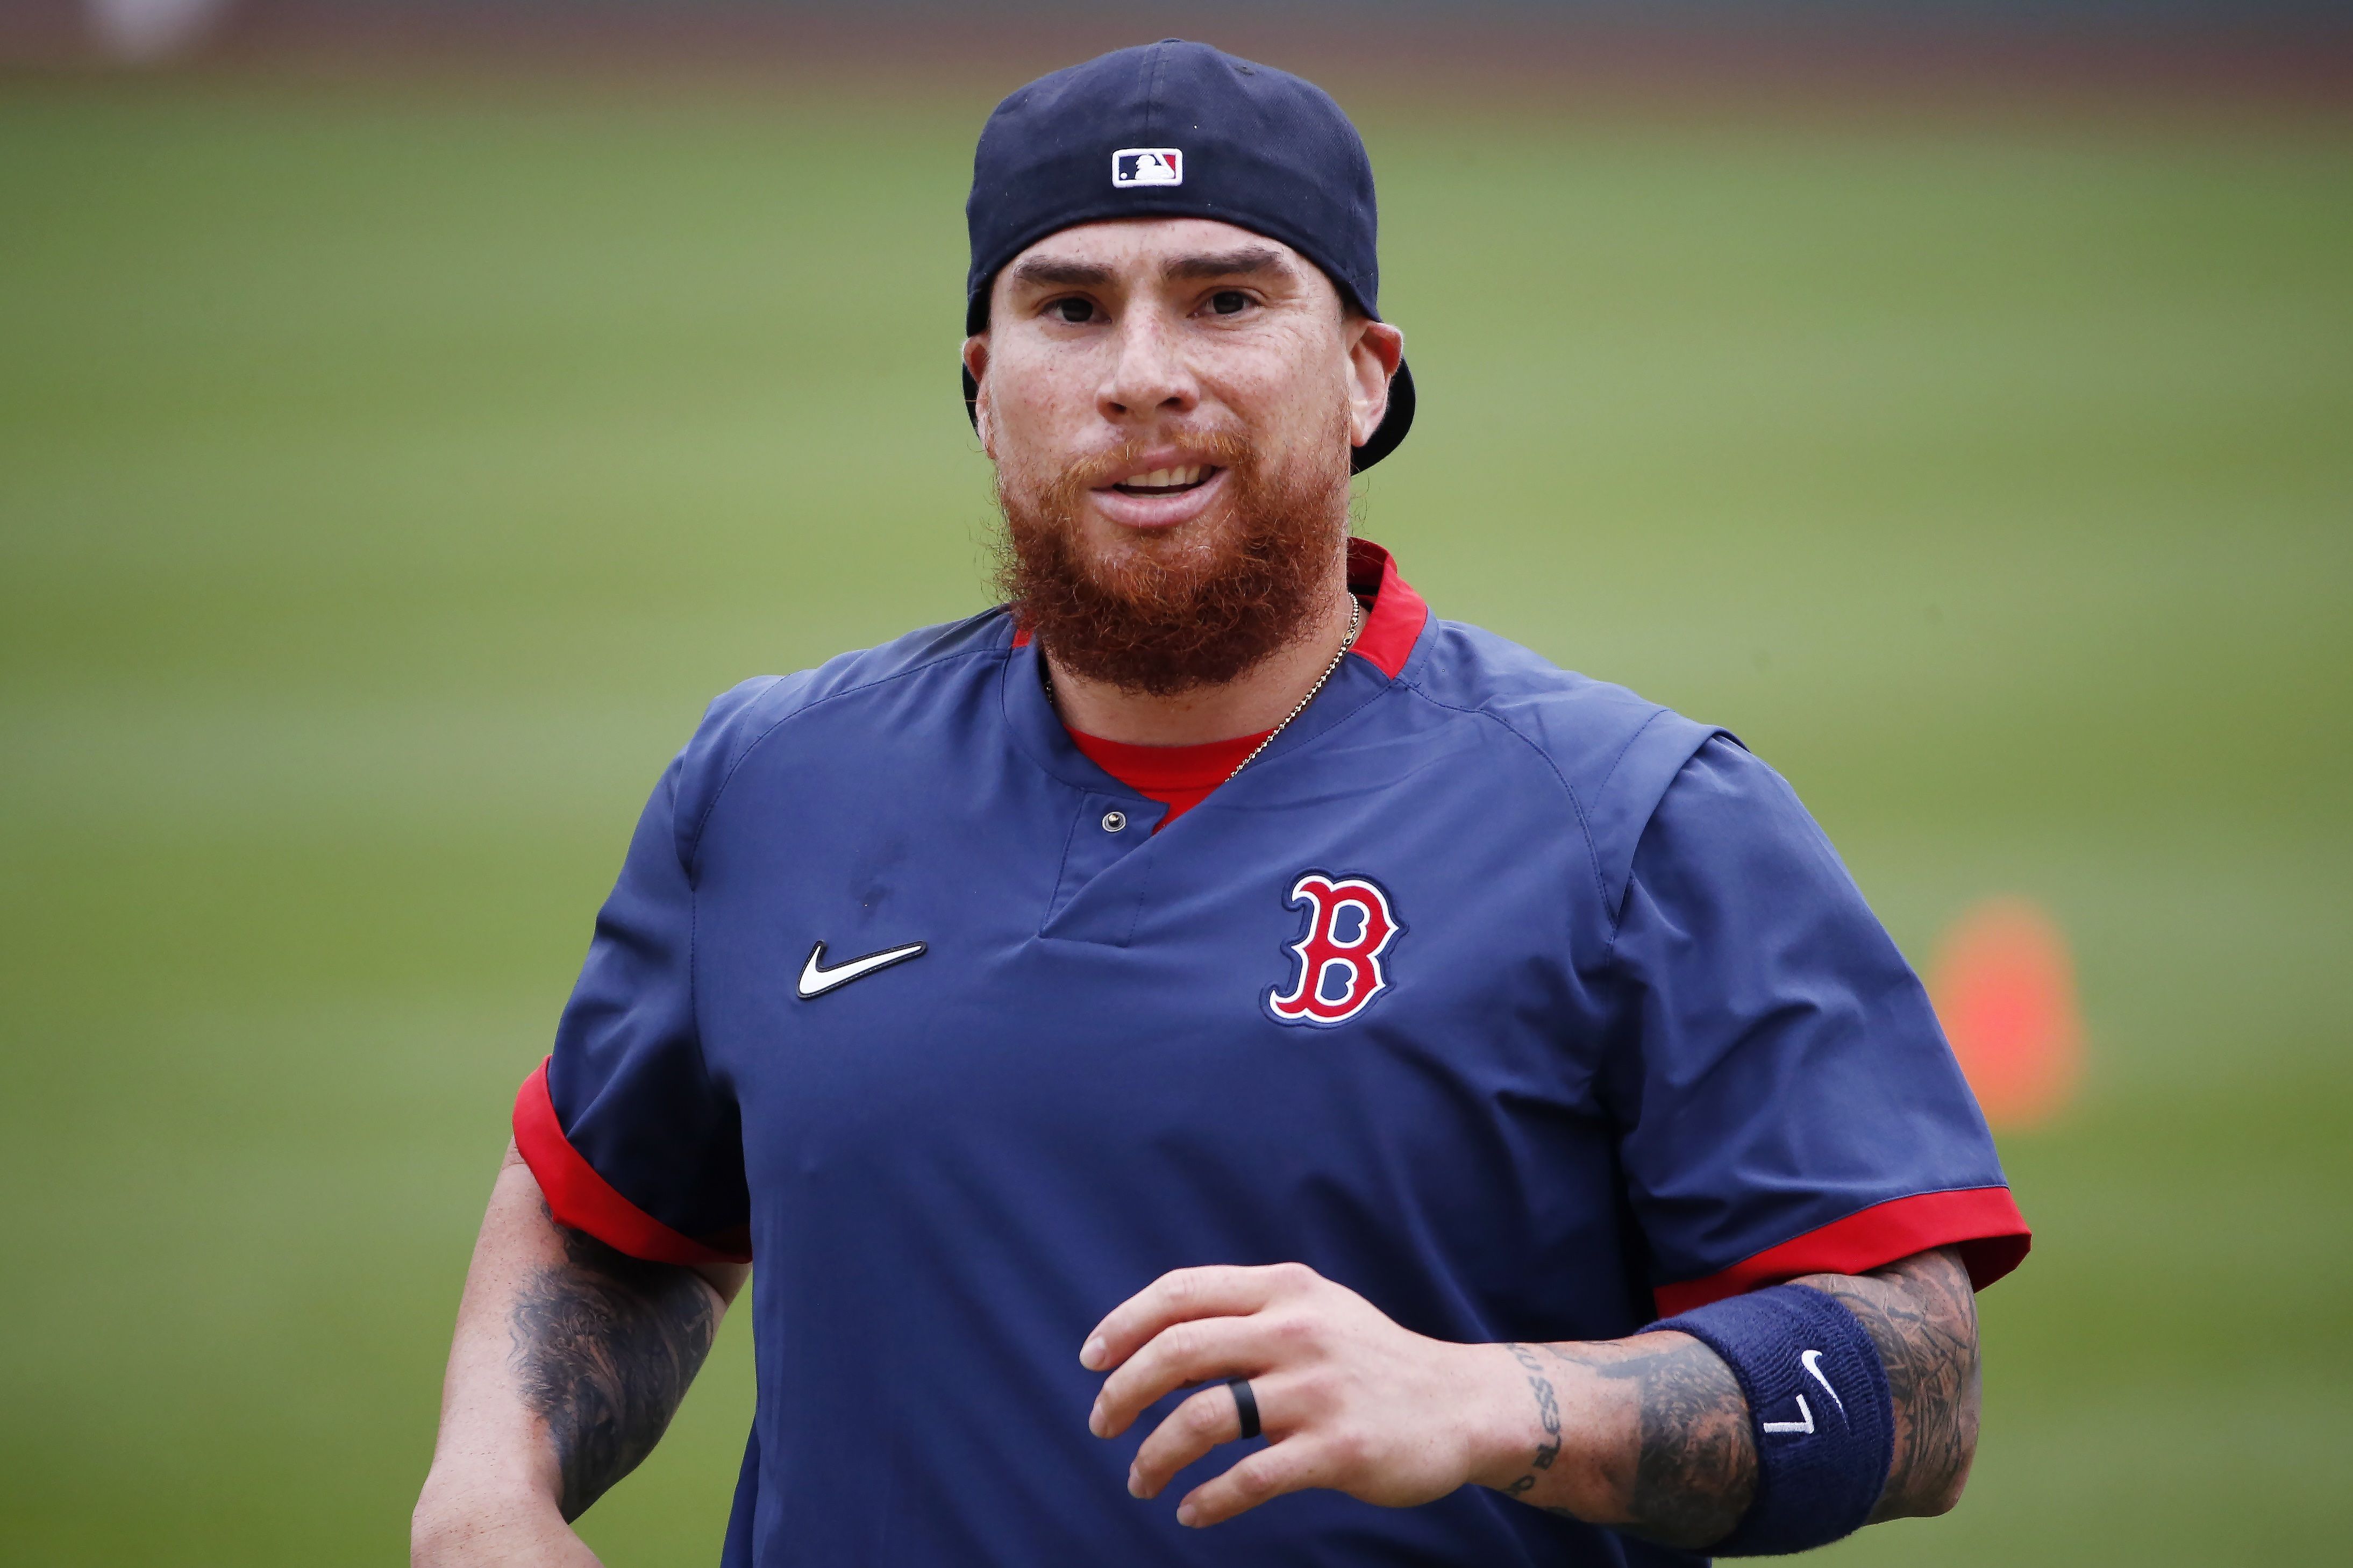 Christian Vázquez shares heartbreaking post after Red Sox